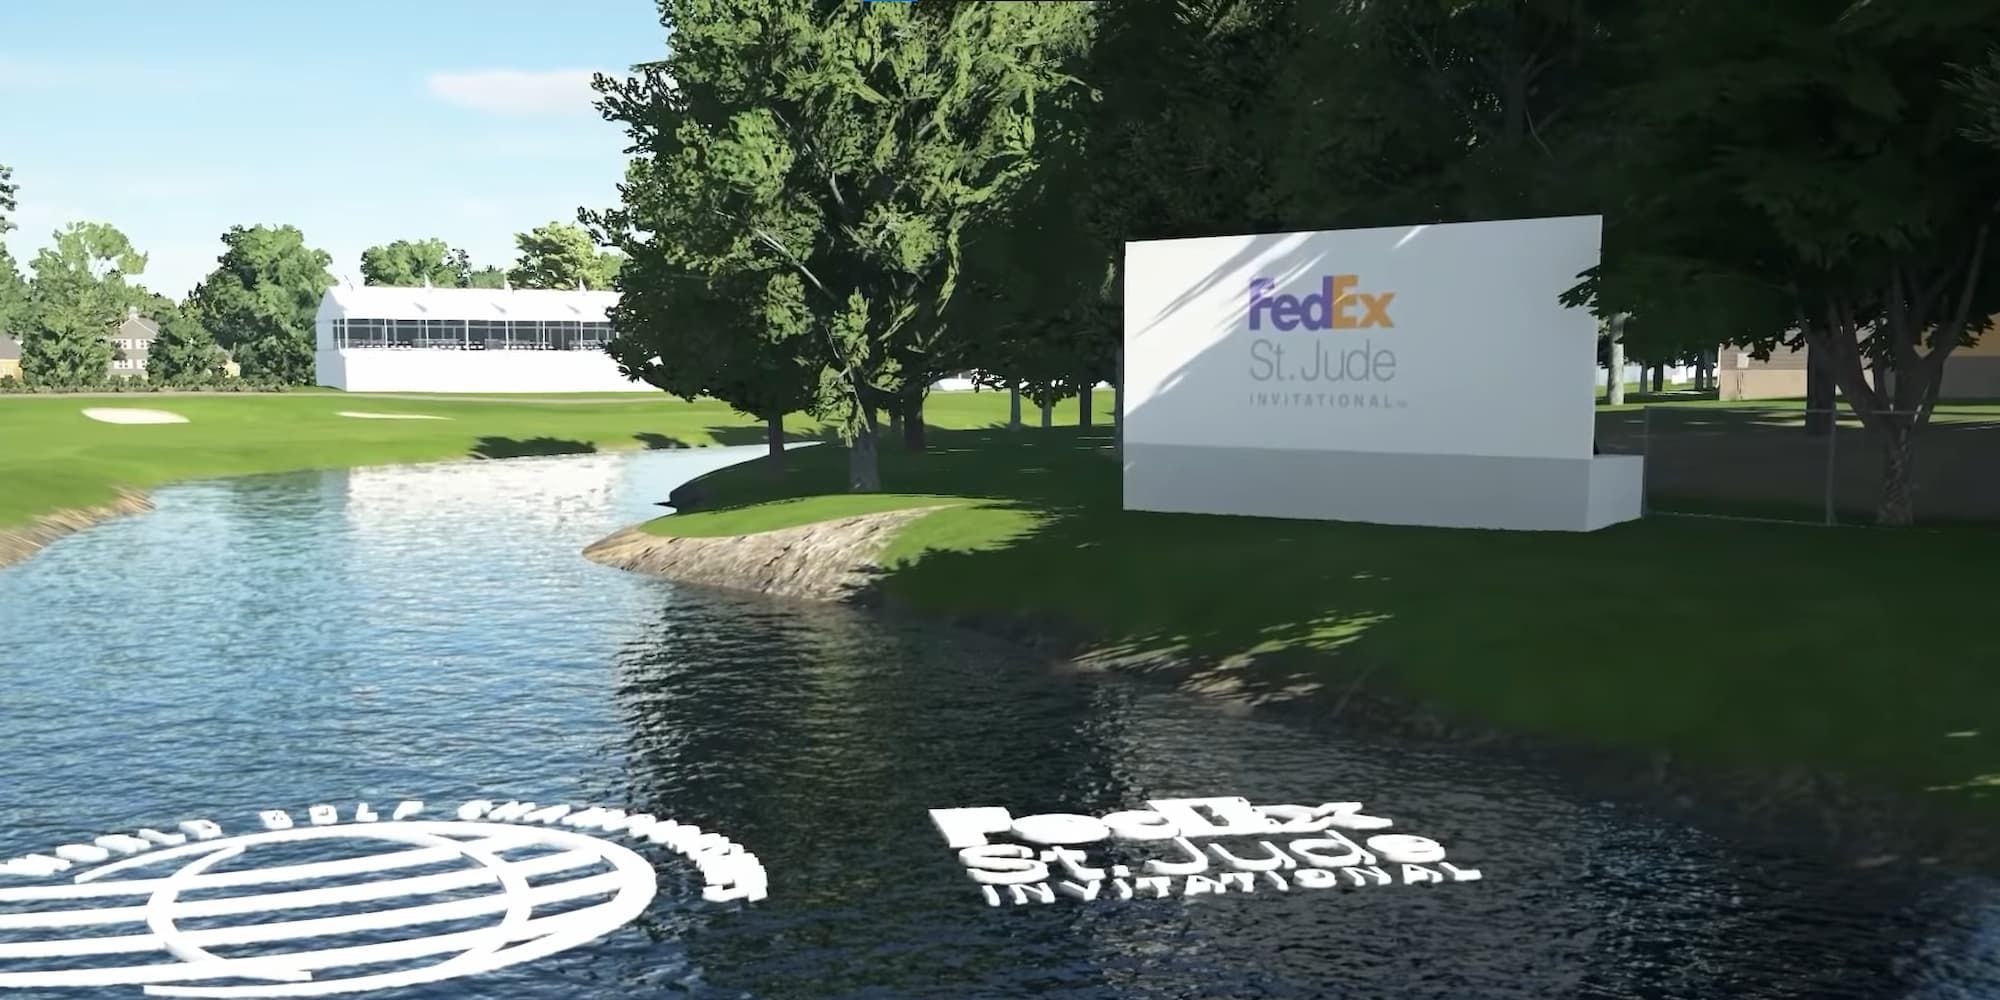 Logos for the FedEx St. Jude Invitational are shown at TPC Southwind.